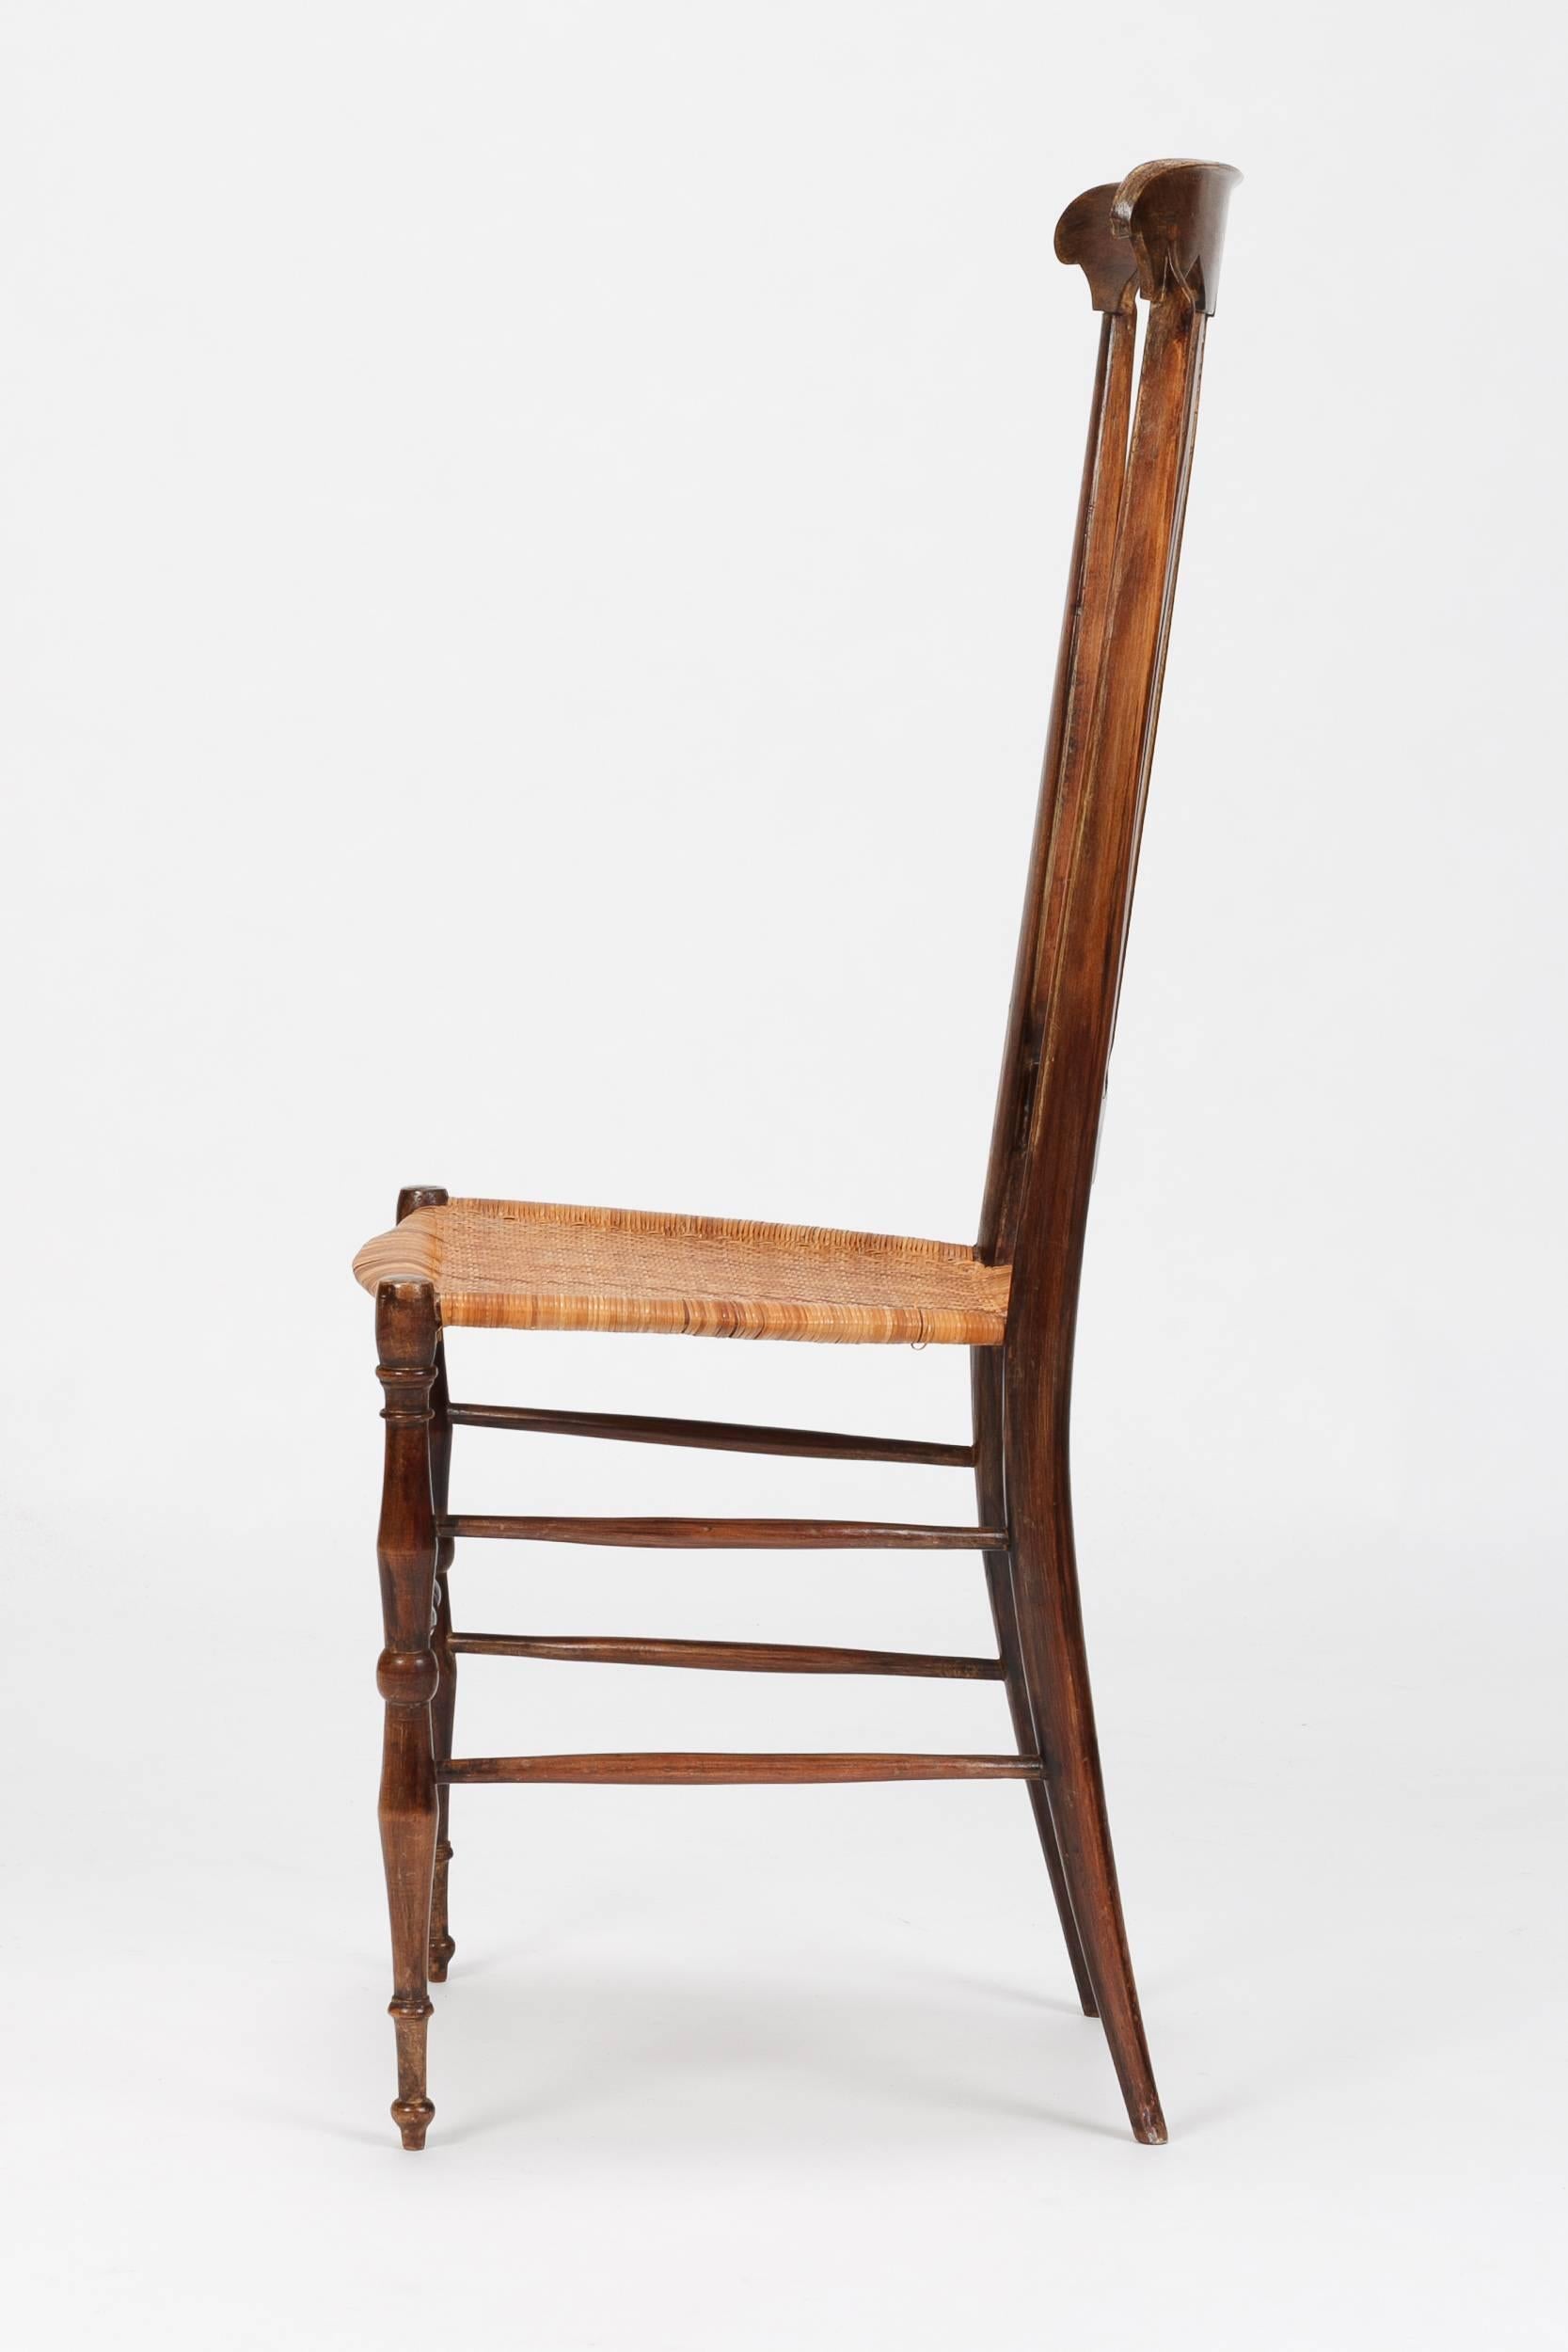 Single side chair from Chiavari in Italy, 1950s. Solid walnut frame with a seat of woven cane. Wonderful handcrafted details.